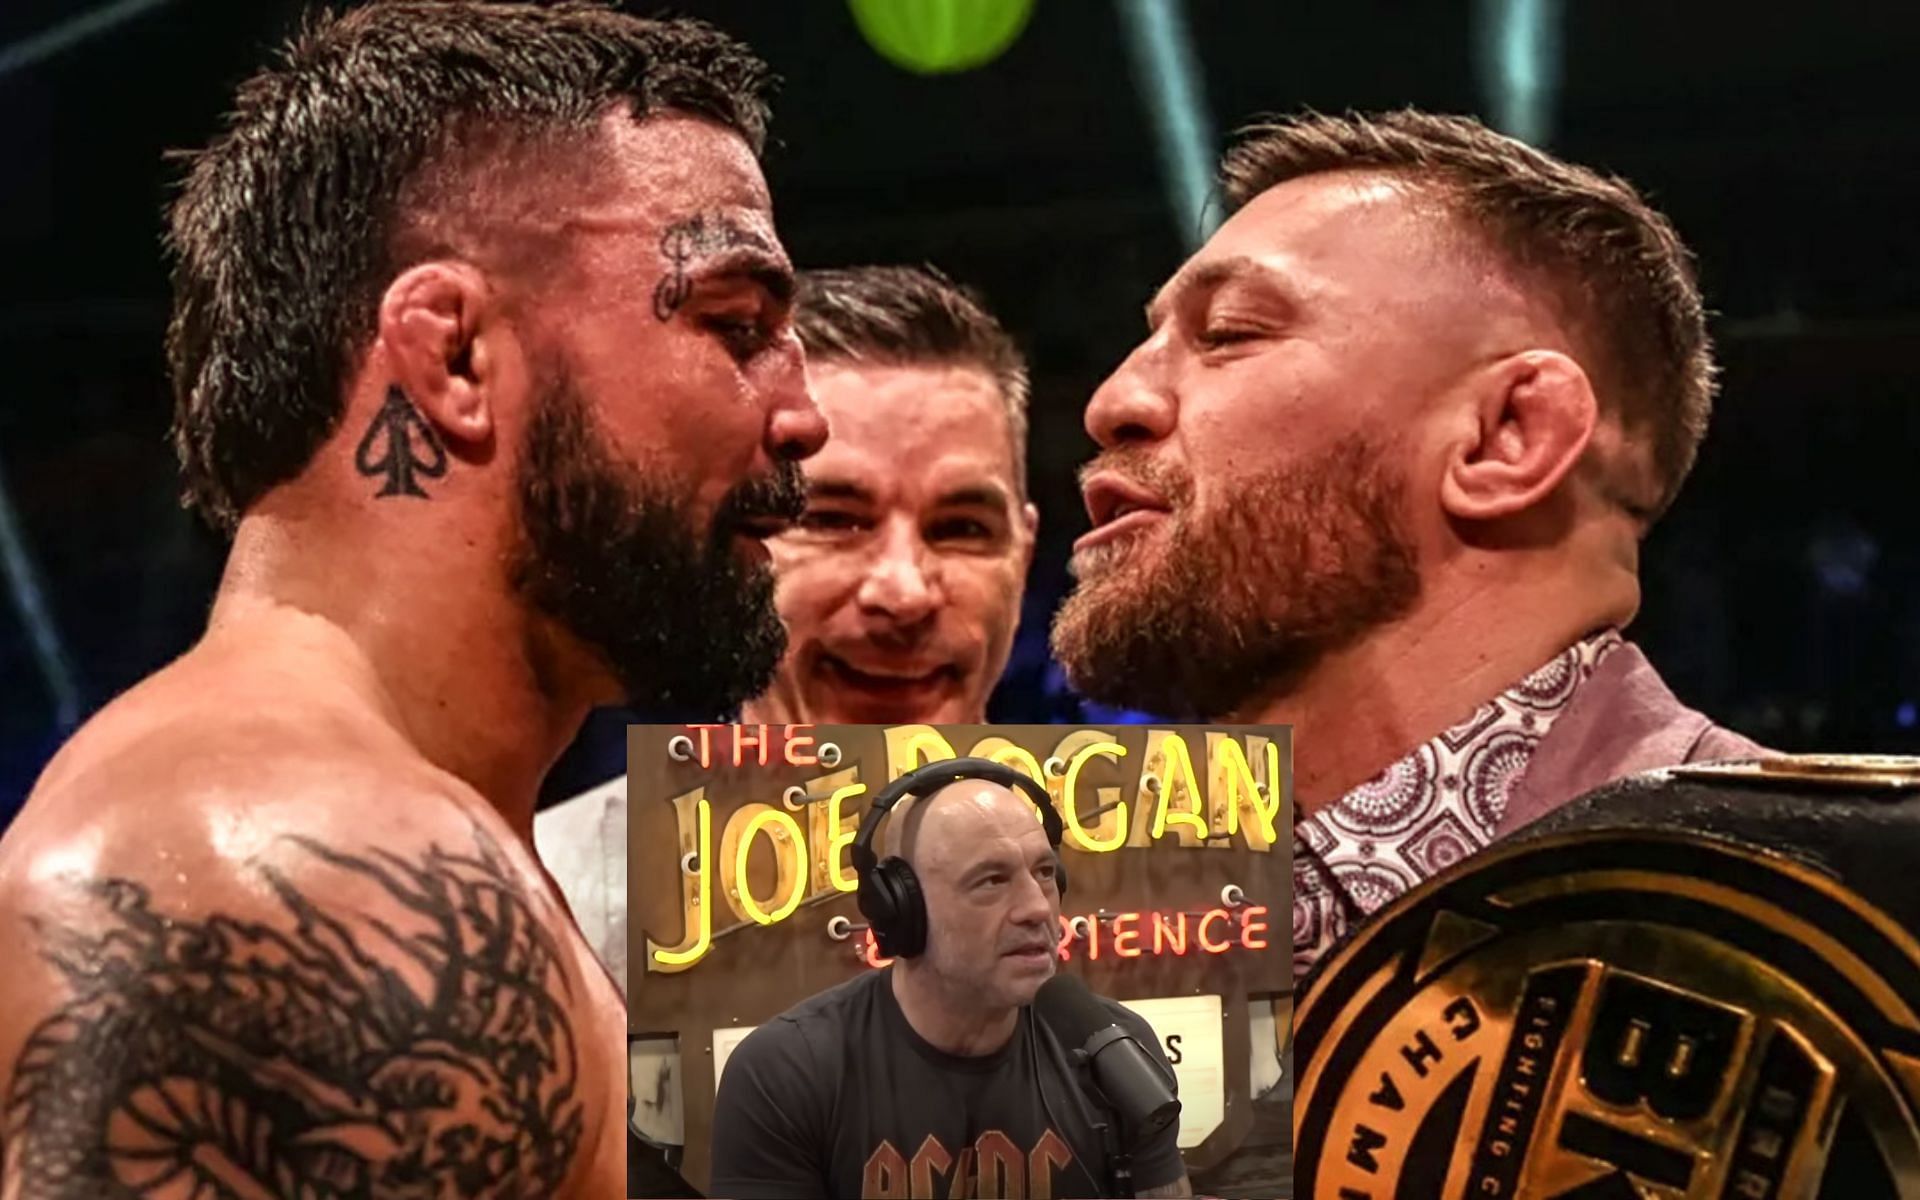 Mike Perry and Conor McGregor, and Joe Rogan (inset). [Images courtesy: BKFC, PowerfulJRE]